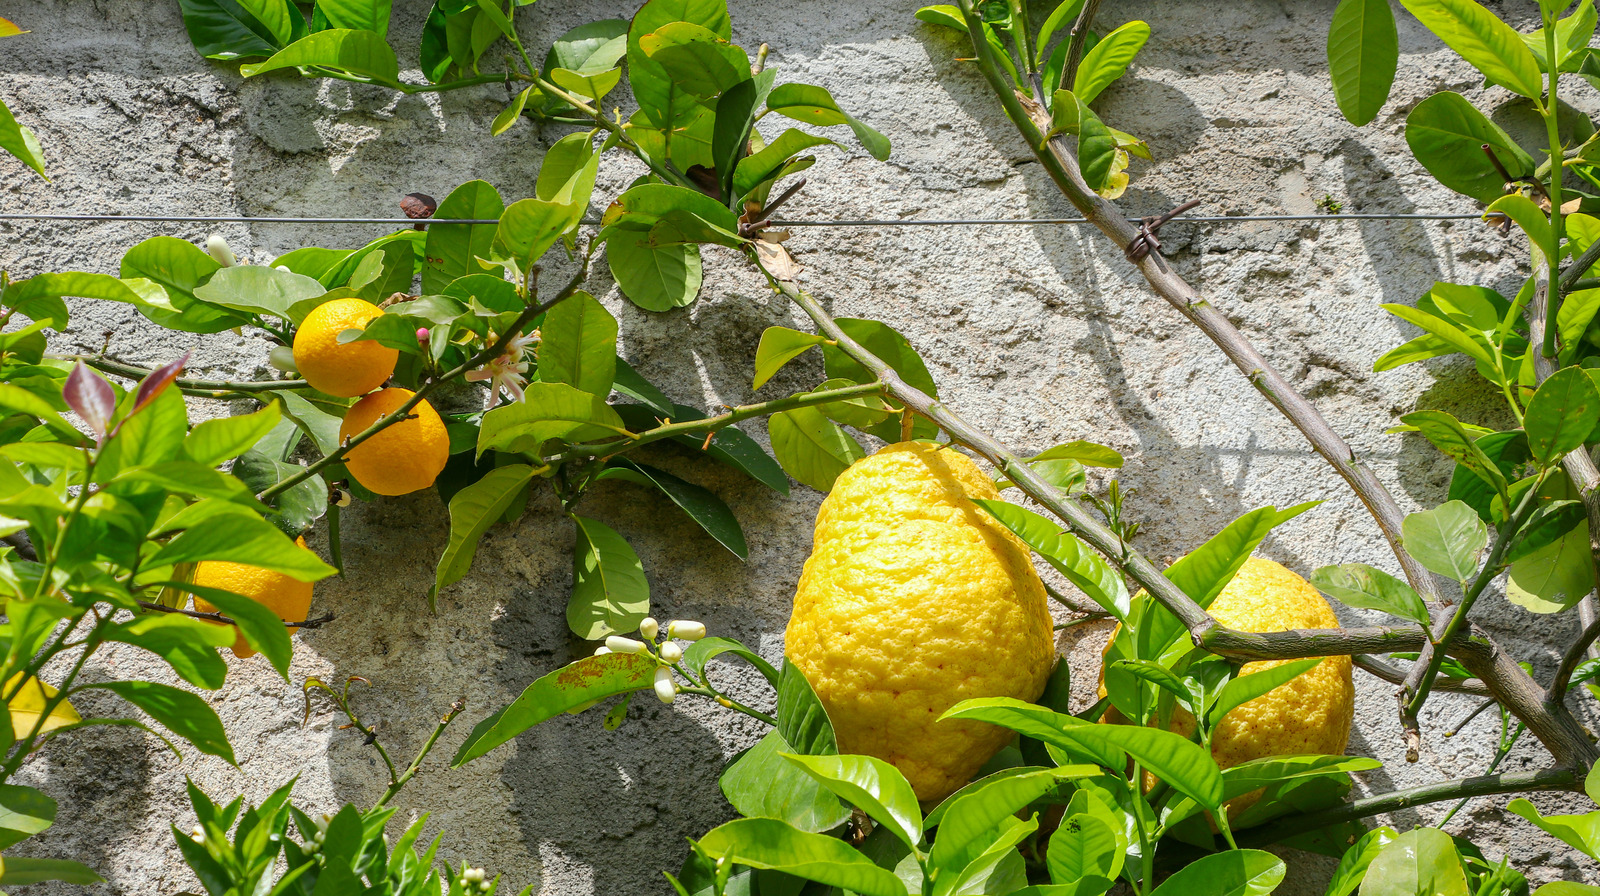 Lemon Vs Citron: What's The Difference?